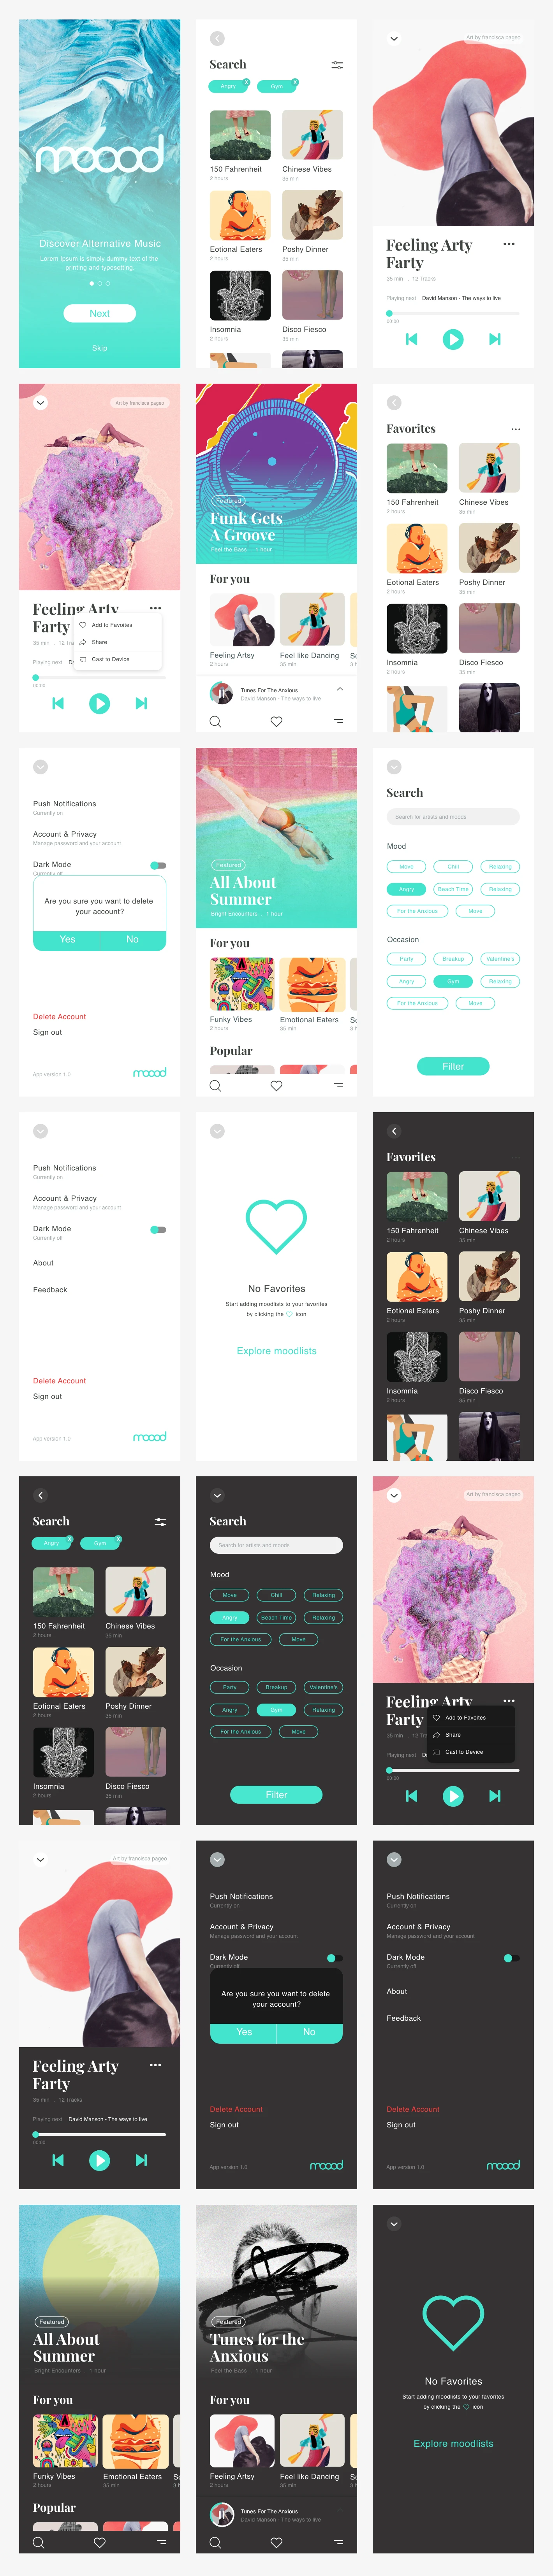 Moood Music App UI Kit for Adobe XD - A simple music and playlist kit made for Adobe XD. This UI Kit contains both light and dark version.